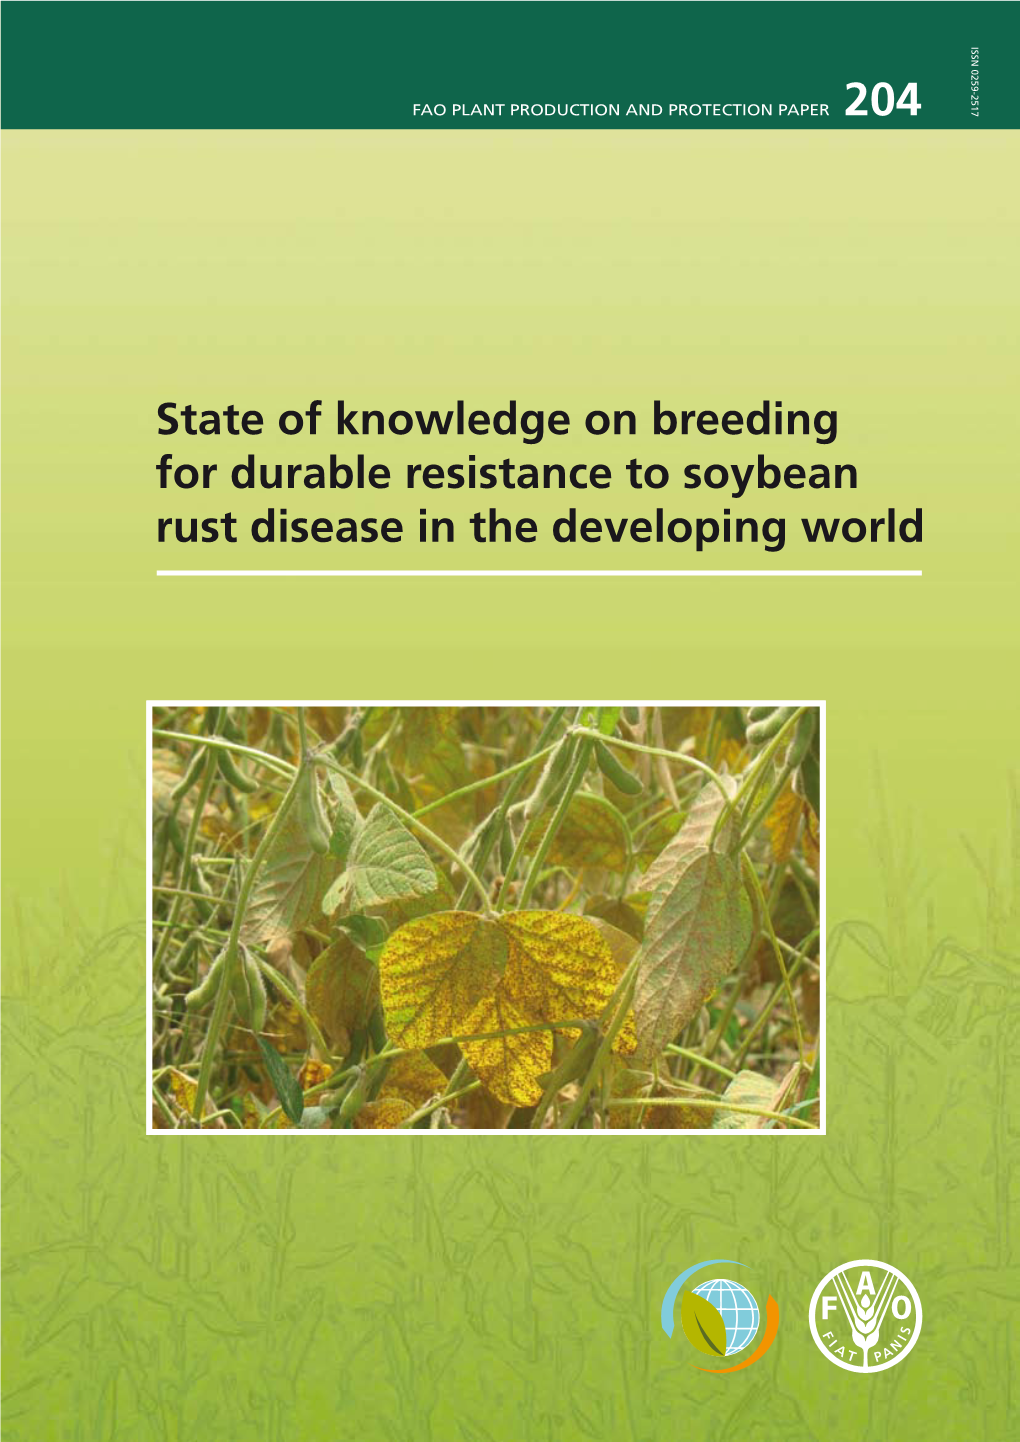 State of Knowledge on Breeding for Durable Resistance to Soybean Rust Disease in the Developing World